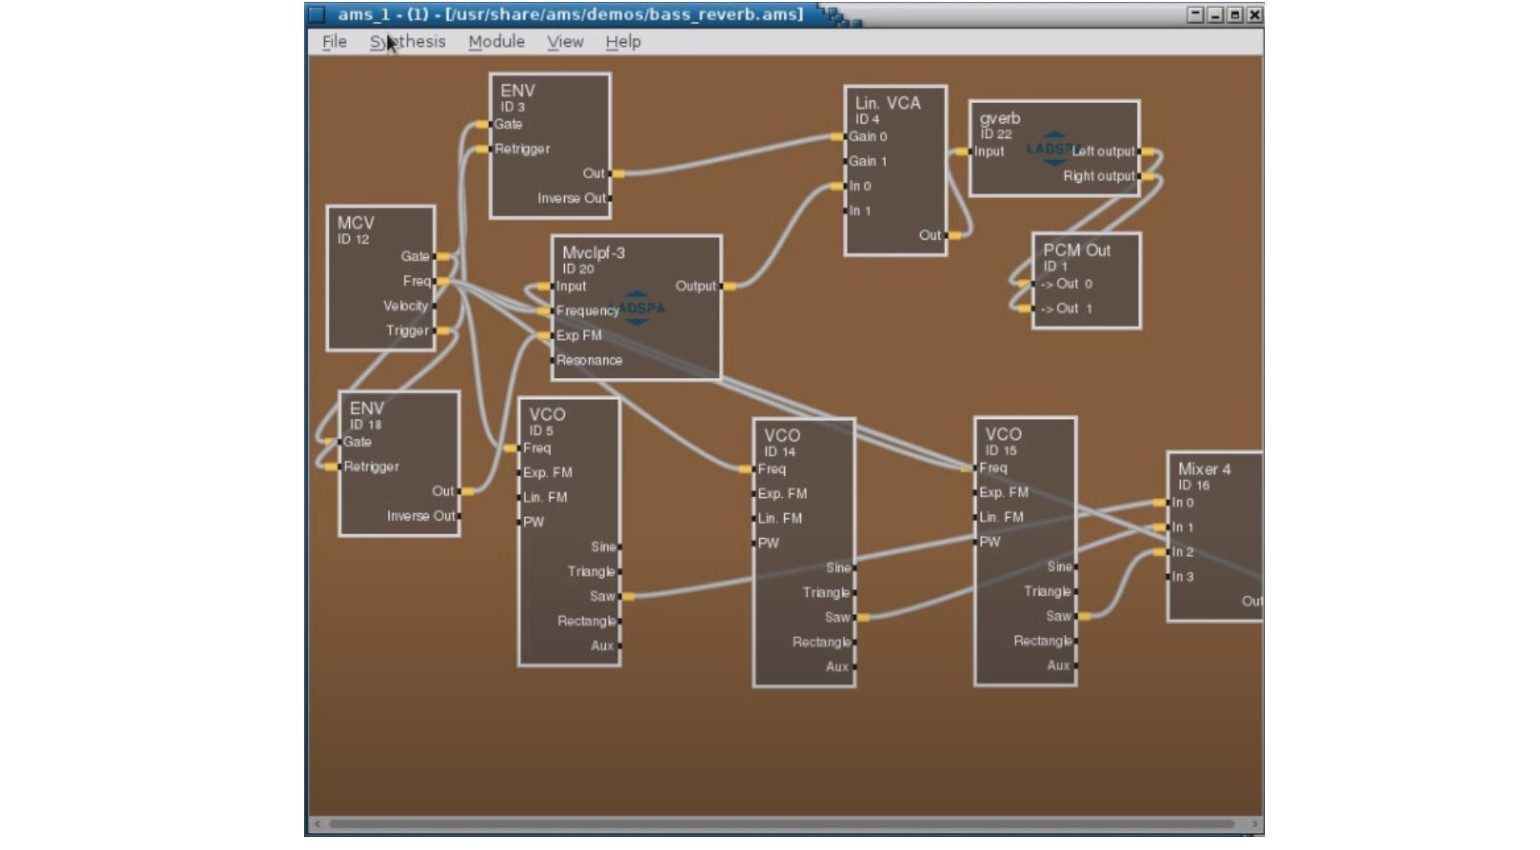 ALSAModularSynth Synthesizer Linux GUI